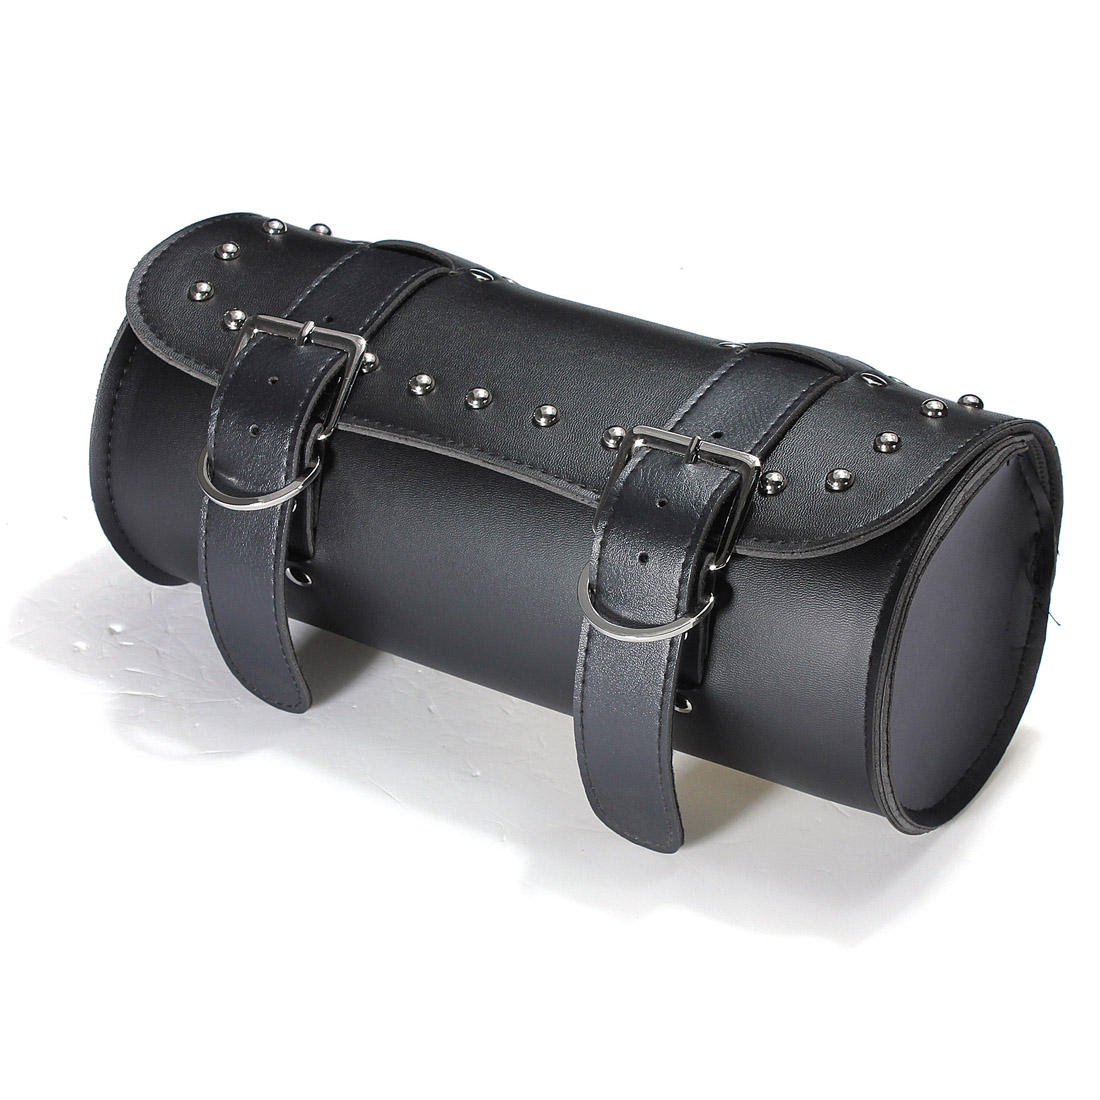 Motorcycle Scooter Tool Bag Saddlebags Leather Storage